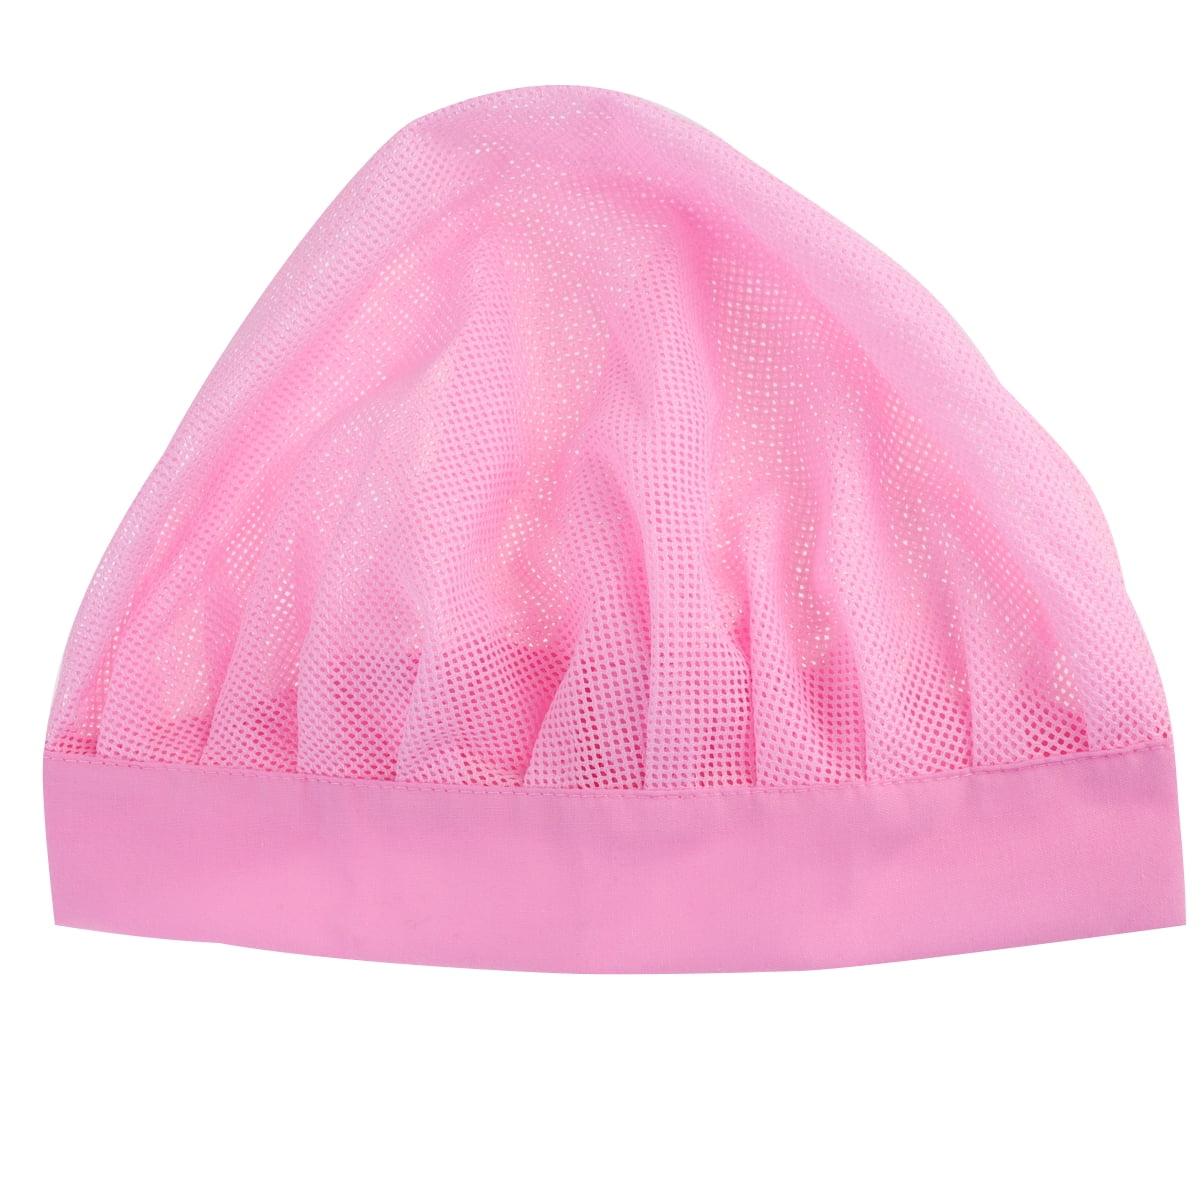 NICEXMAS Exquisite Cotton Hat Useful Prevent Hair Loss Breathable Head  Protector for Home Daily Use (Wide-brimmed and Elastic, Pink) 